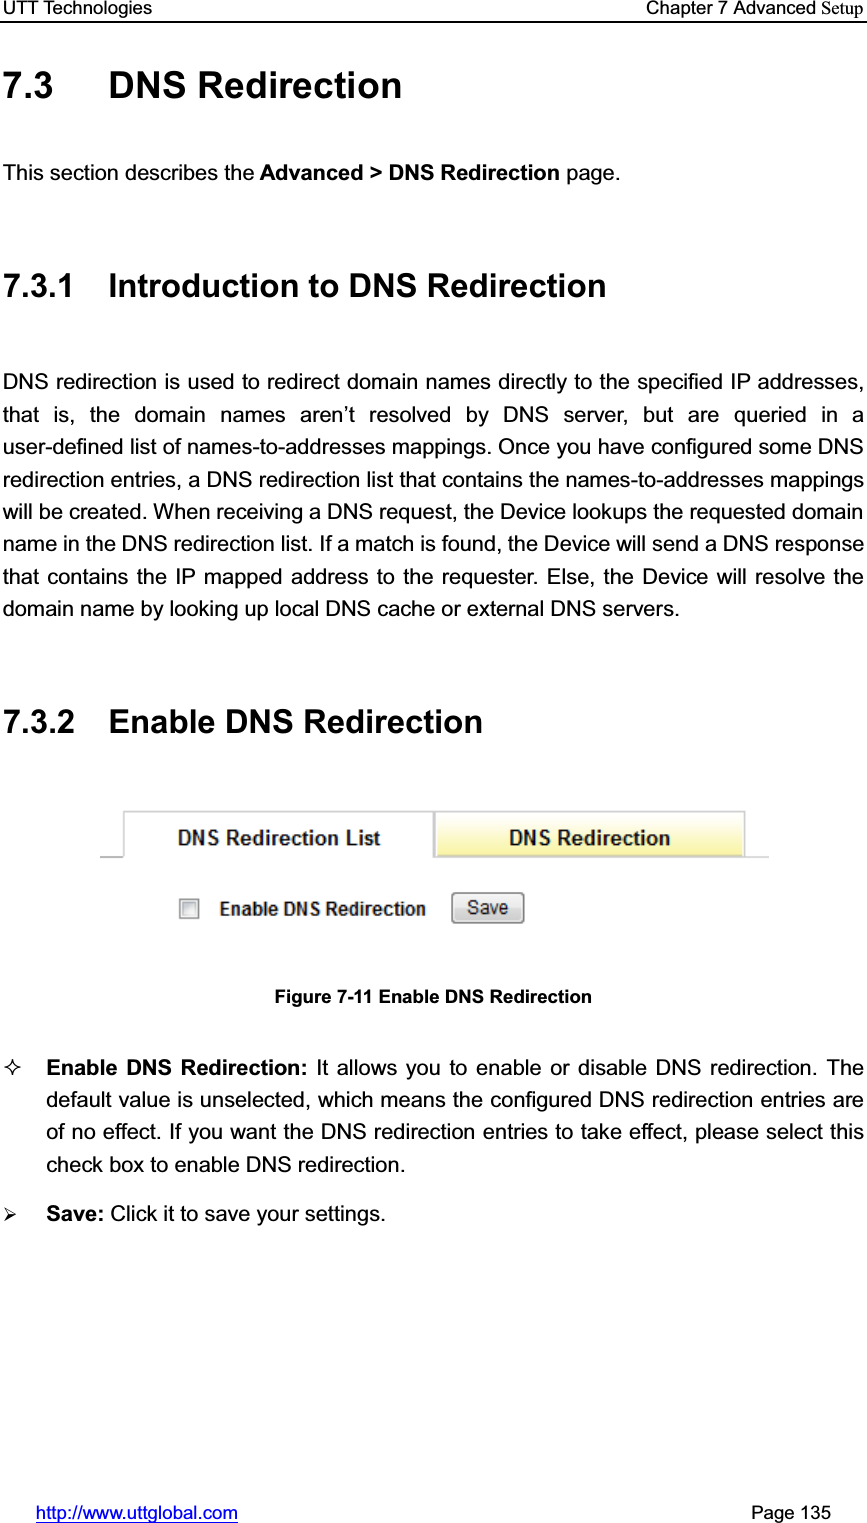 UTT Technologies    Chapter 7 Advanced Setuphttp://www.uttglobal.com                                                       Page 135 7.3 DNS Redirection This section describes the Advanced &gt; DNS Redirection page. 7.3.1 Introduction to DNS Redirection DNS redirection is used to redirect domain names directly to the specified IP addresses, that is, the domain names aren¶t resolved by DNS server, but are queried in a user-defined list of names-to-addresses mappings. Once you have configured some DNS redirection entries, a DNS redirection list that contains the names-to-addresses mappingswill be created. When receiving a DNS request, the Device lookups the requested domain name in the DNS redirection list. If a match is found, the Device will send a DNS response that contains the IP mapped address to the requester. Else, the Device will resolve the domain name by looking up local DNS cache or external DNS servers. 7.3.2 Enable DNS Redirection Figure 7-11 Enable DNS Redirection Enable DNS Redirection: It allows you to enable or disable DNS redirection. The default value is unselected, which means the configured DNS redirection entries are of no effect. If you want the DNS redirection entries to take effect, please select this check box to enable DNS redirection. ¾Save: Click it to save your settings.